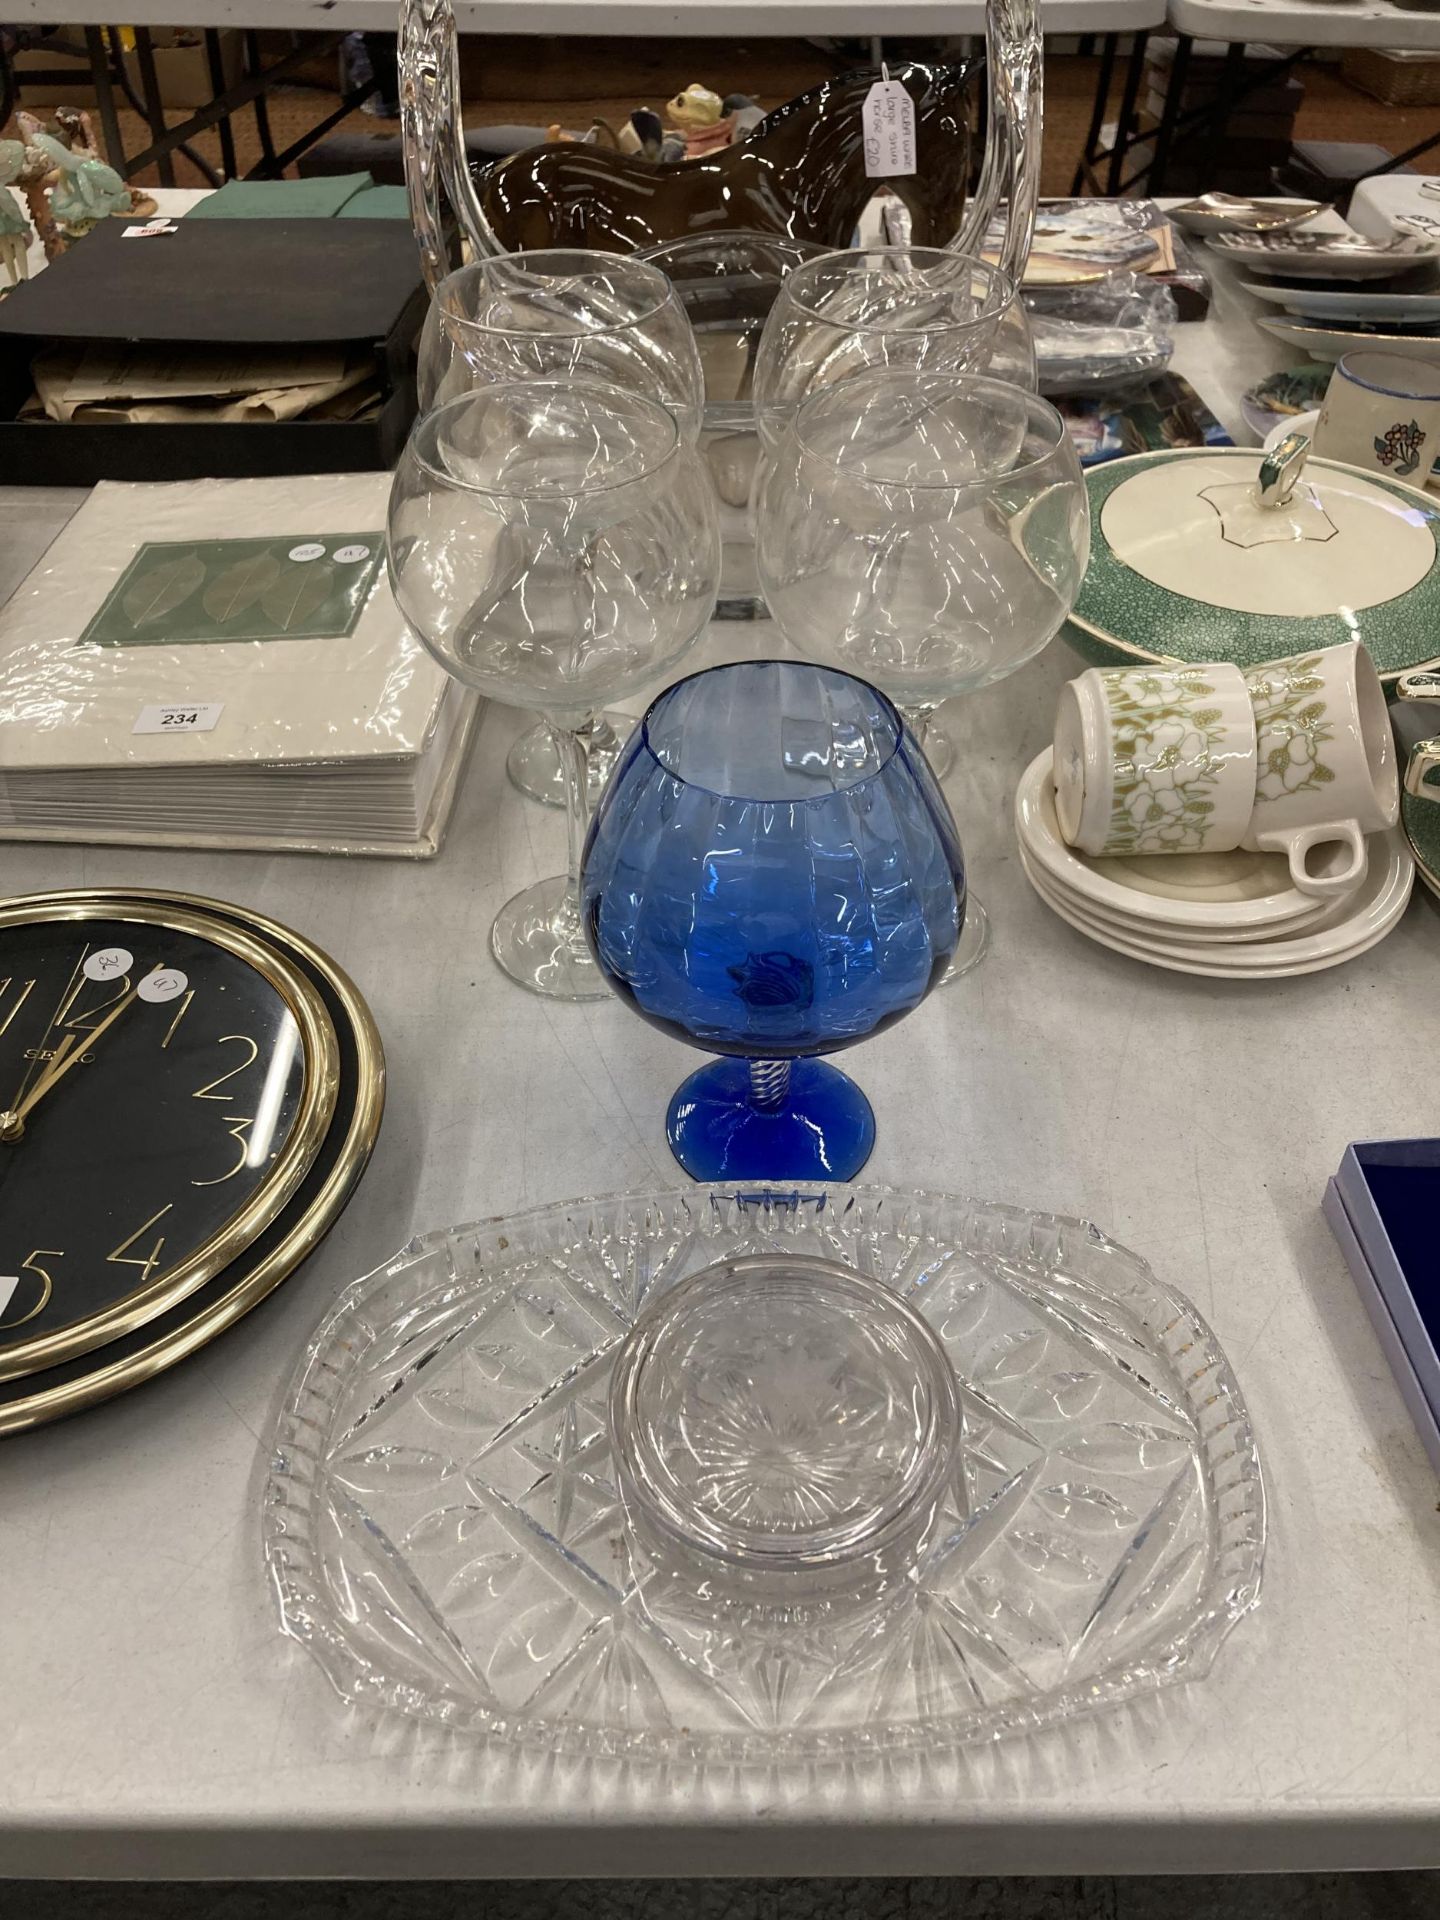 A QUANTITY OF GLASSWARE TO INCLUDE A LARGE HEAVY CENTREPIECE BOWL, LARGE WINE GLASSES, ETC